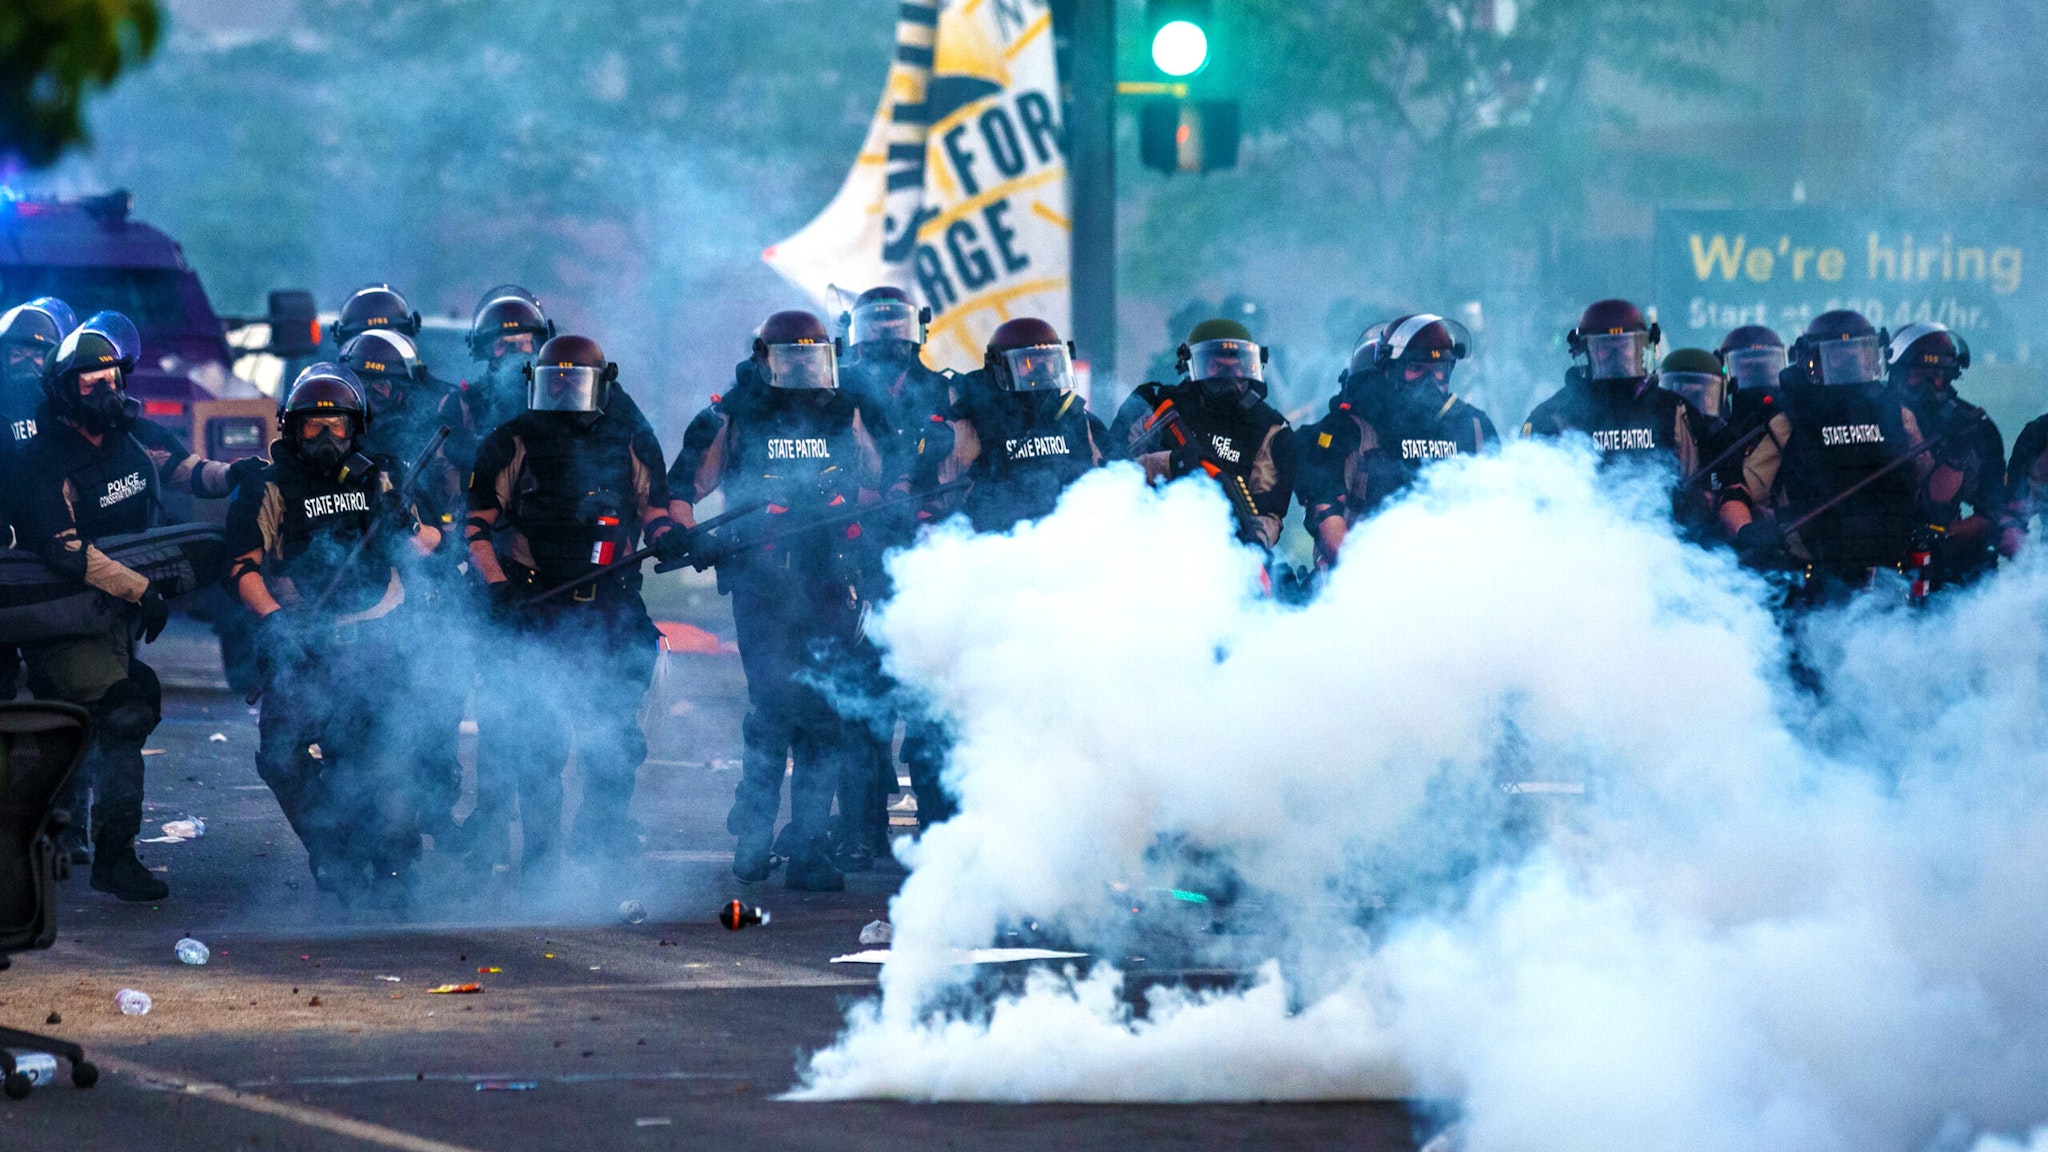 Smoke rises near a row of police in riot gear near the 5th police precinct during a demonstration to call for justice for George Floyd, a black man who died while in custody of the Minneapolis police, on May 30, 2020 in Minneapolis, Minnesota. - Clashes broke out and major cities imposed curfews as America began another night of unrest Saturday with angry demonstrators ignoring warnings from President Donald Trump that his government would stop violent protests over police brutality "cold."